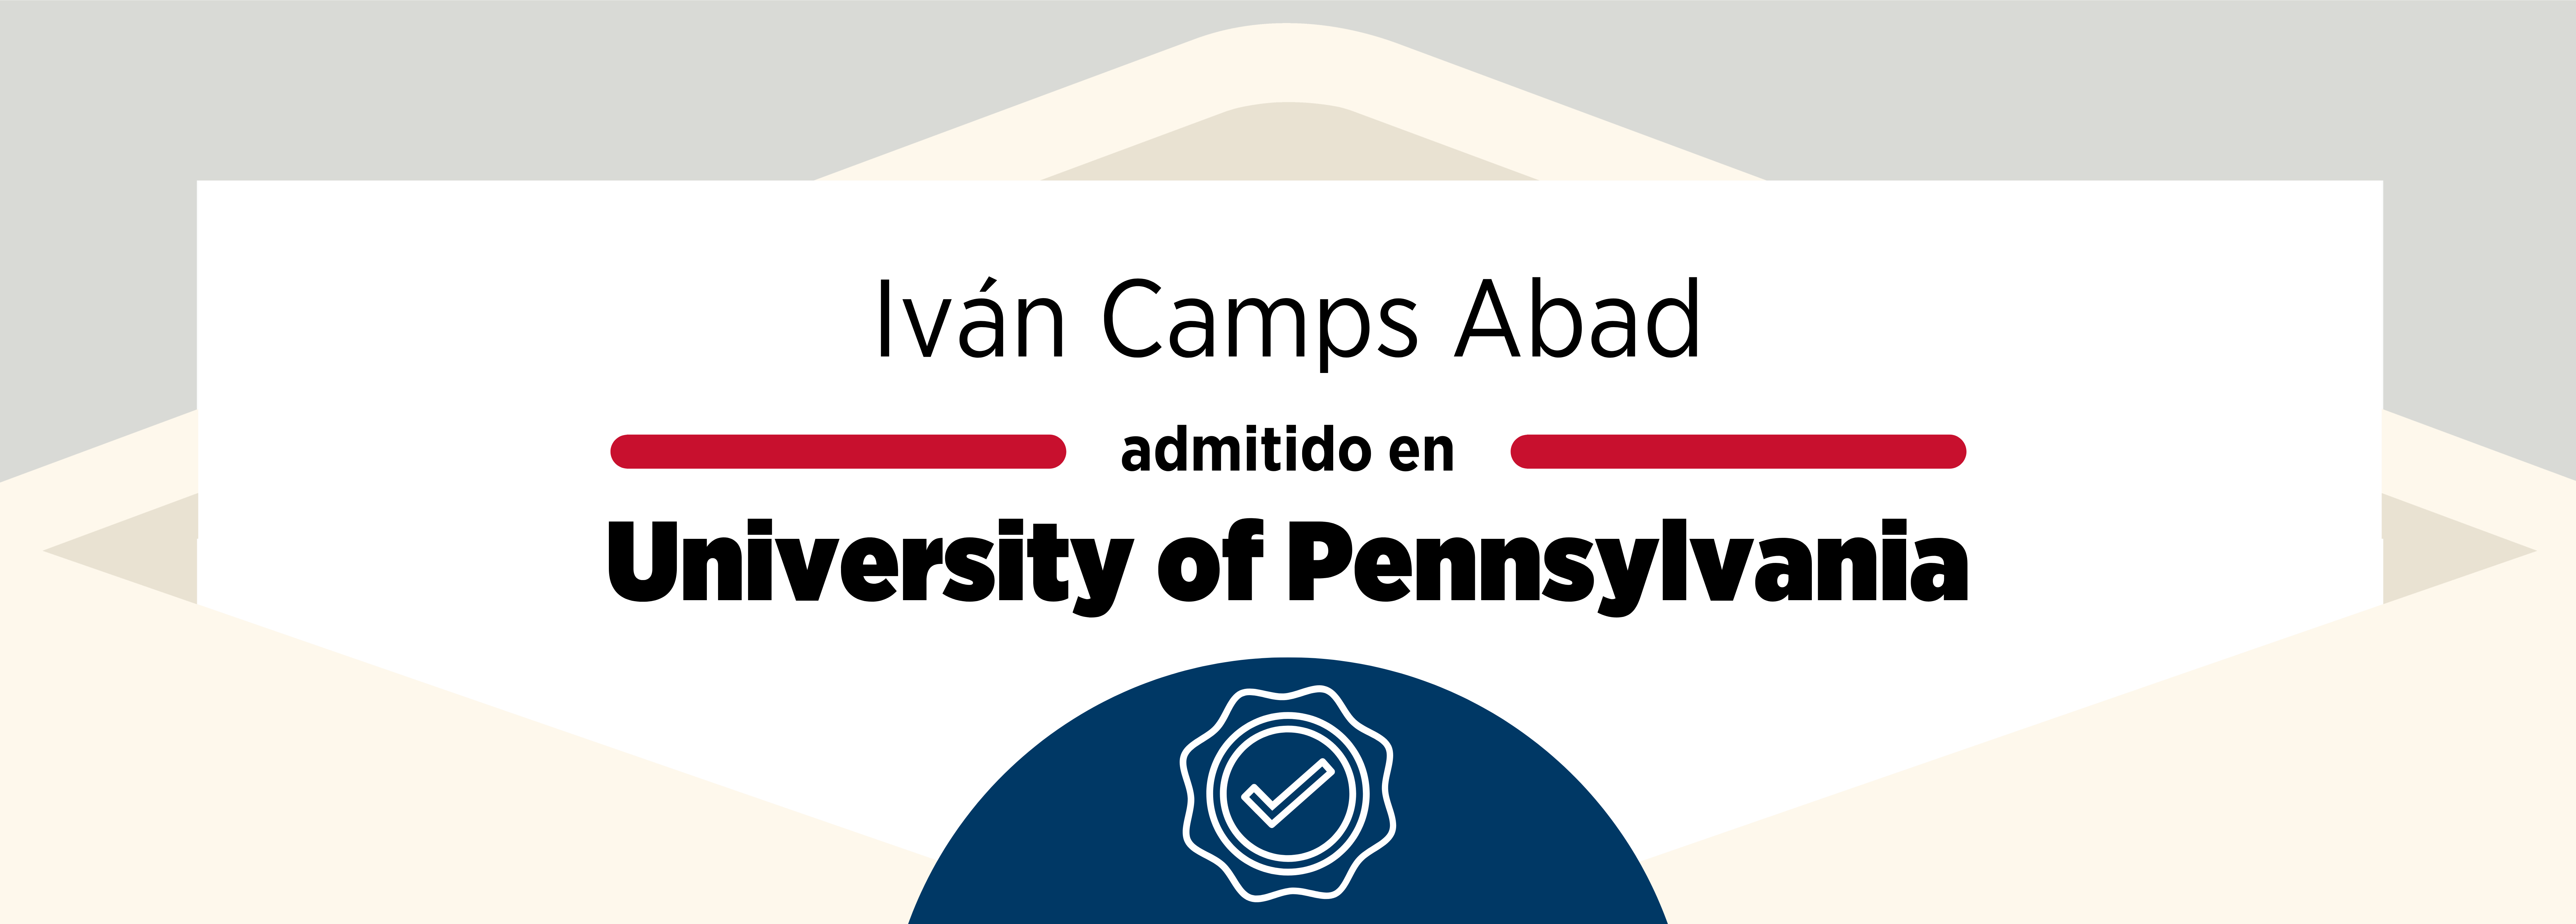 Admissions 2019: Iván Camps Abad & University of Pennsylvania